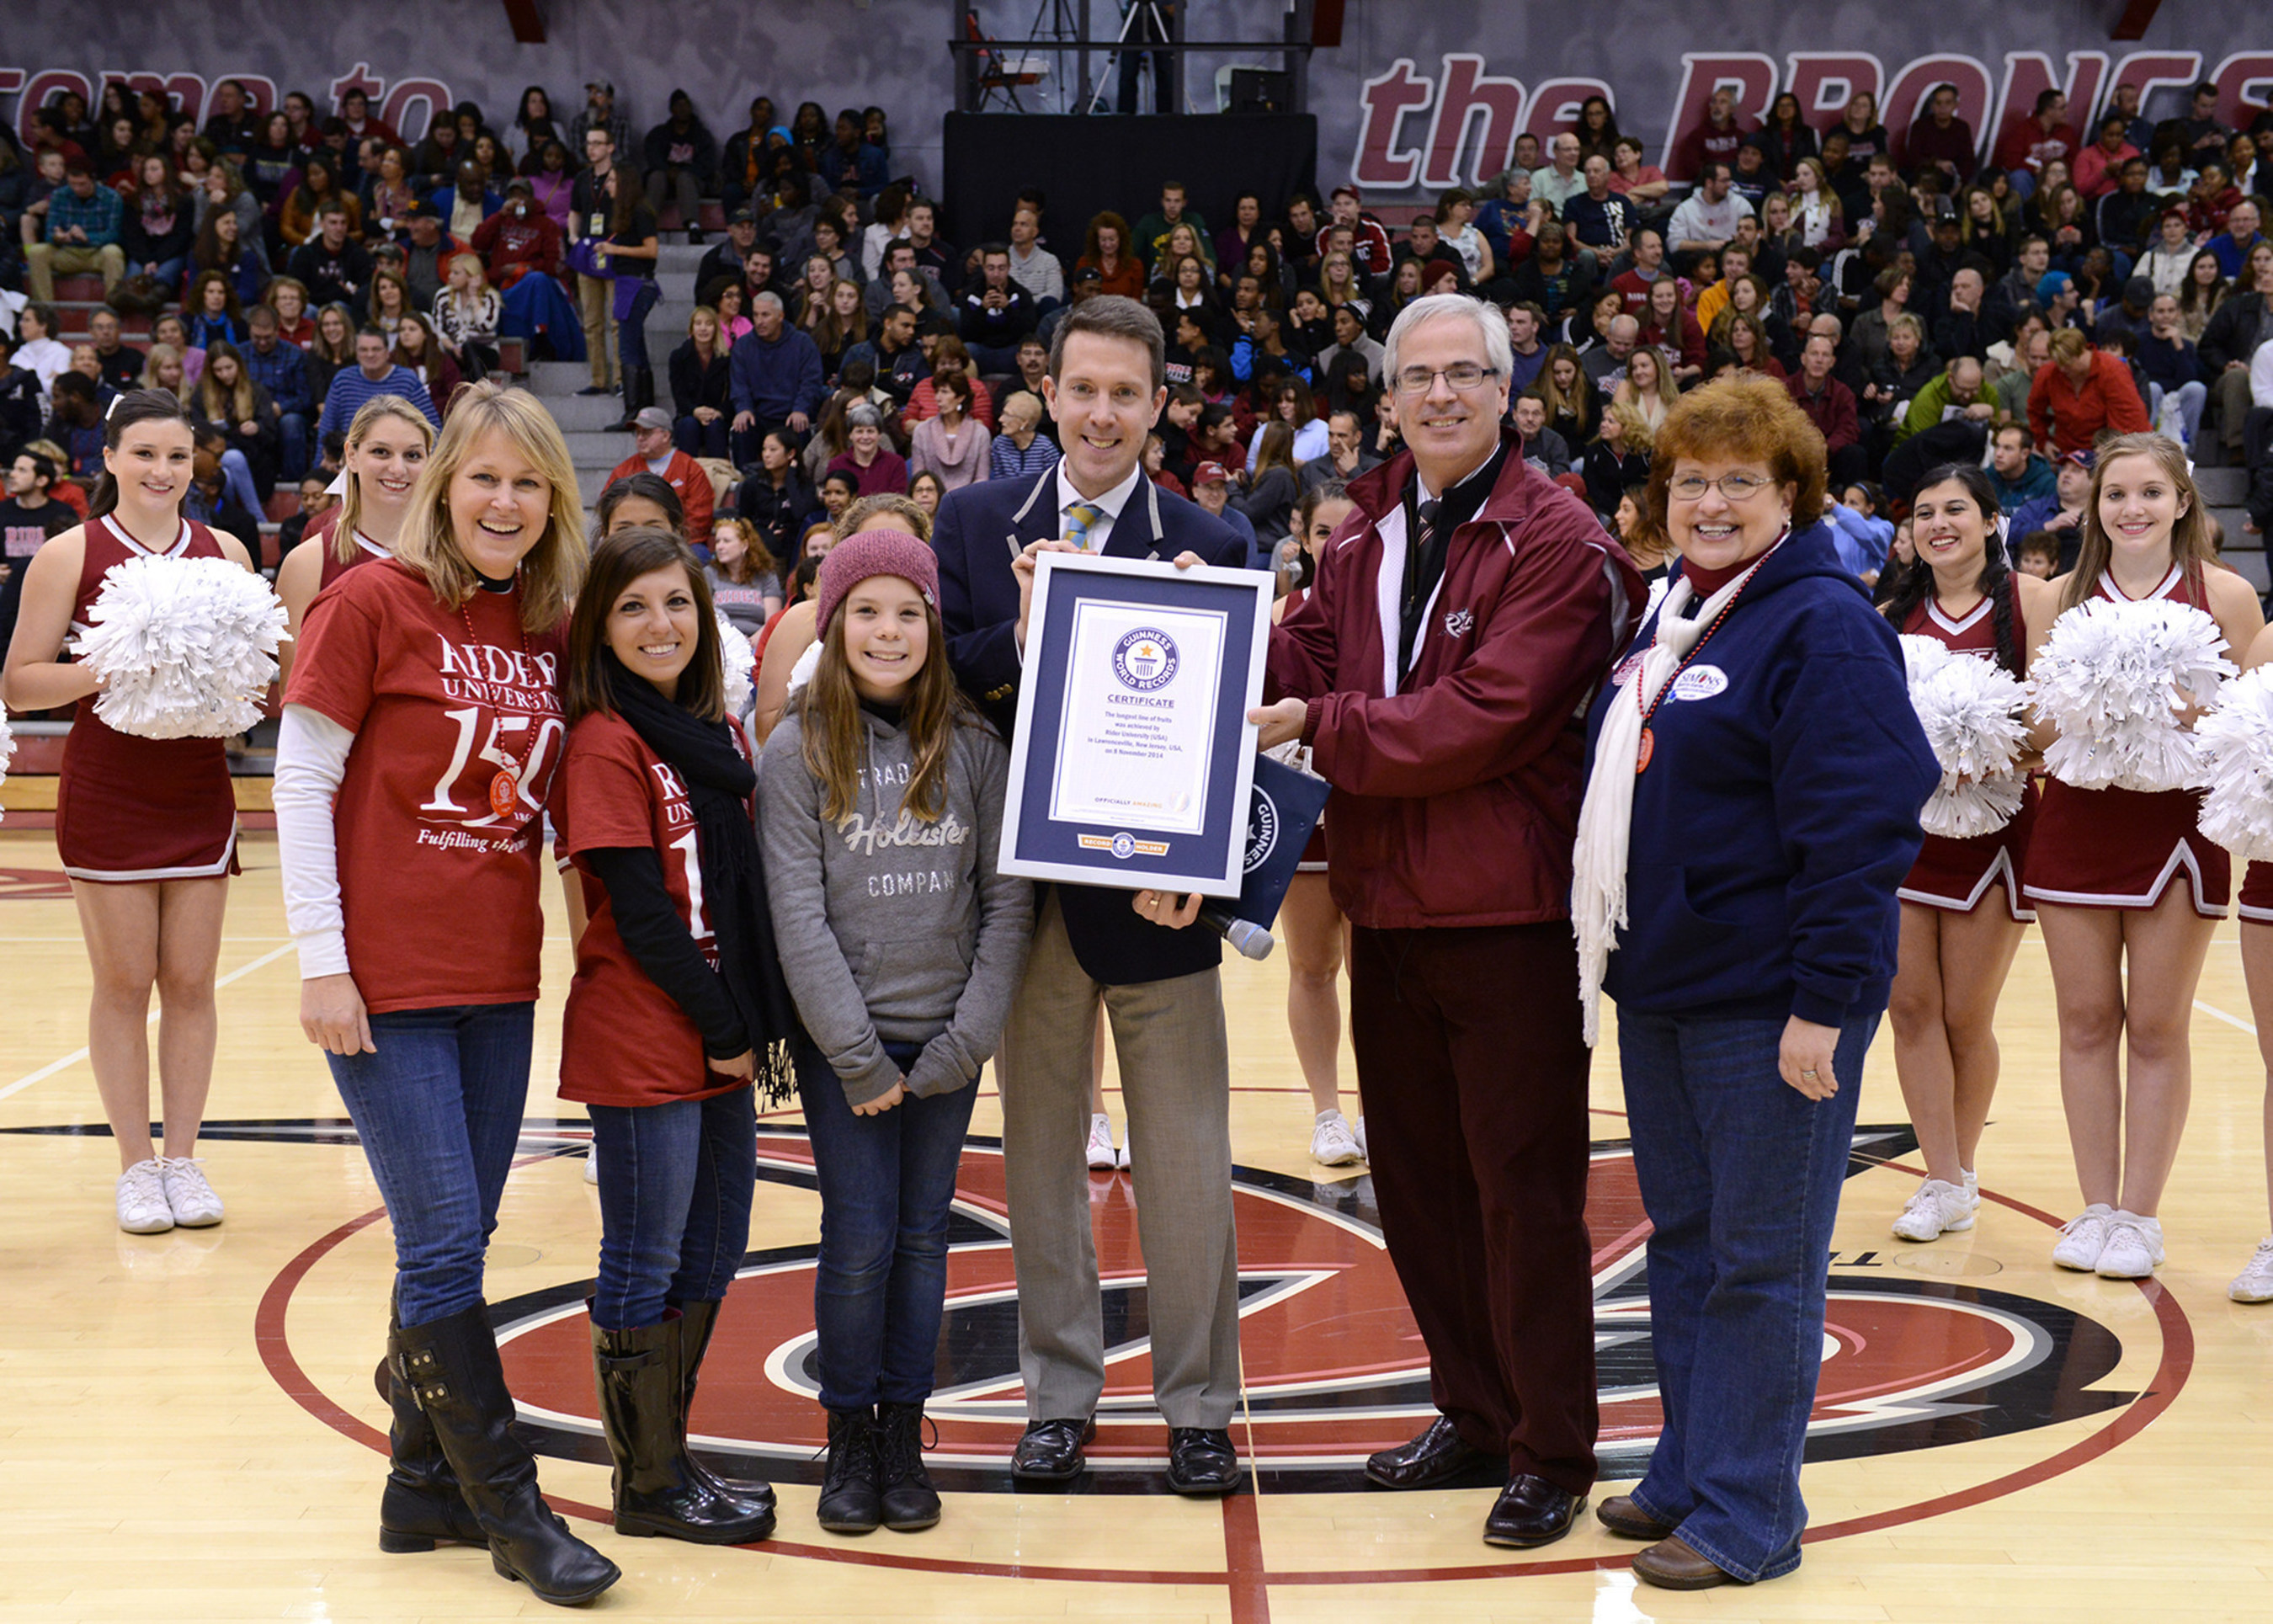 Rider University broke the Guinness World Record for the Longest Line of Fruits by creating a giant string of 10,036 cranberries.